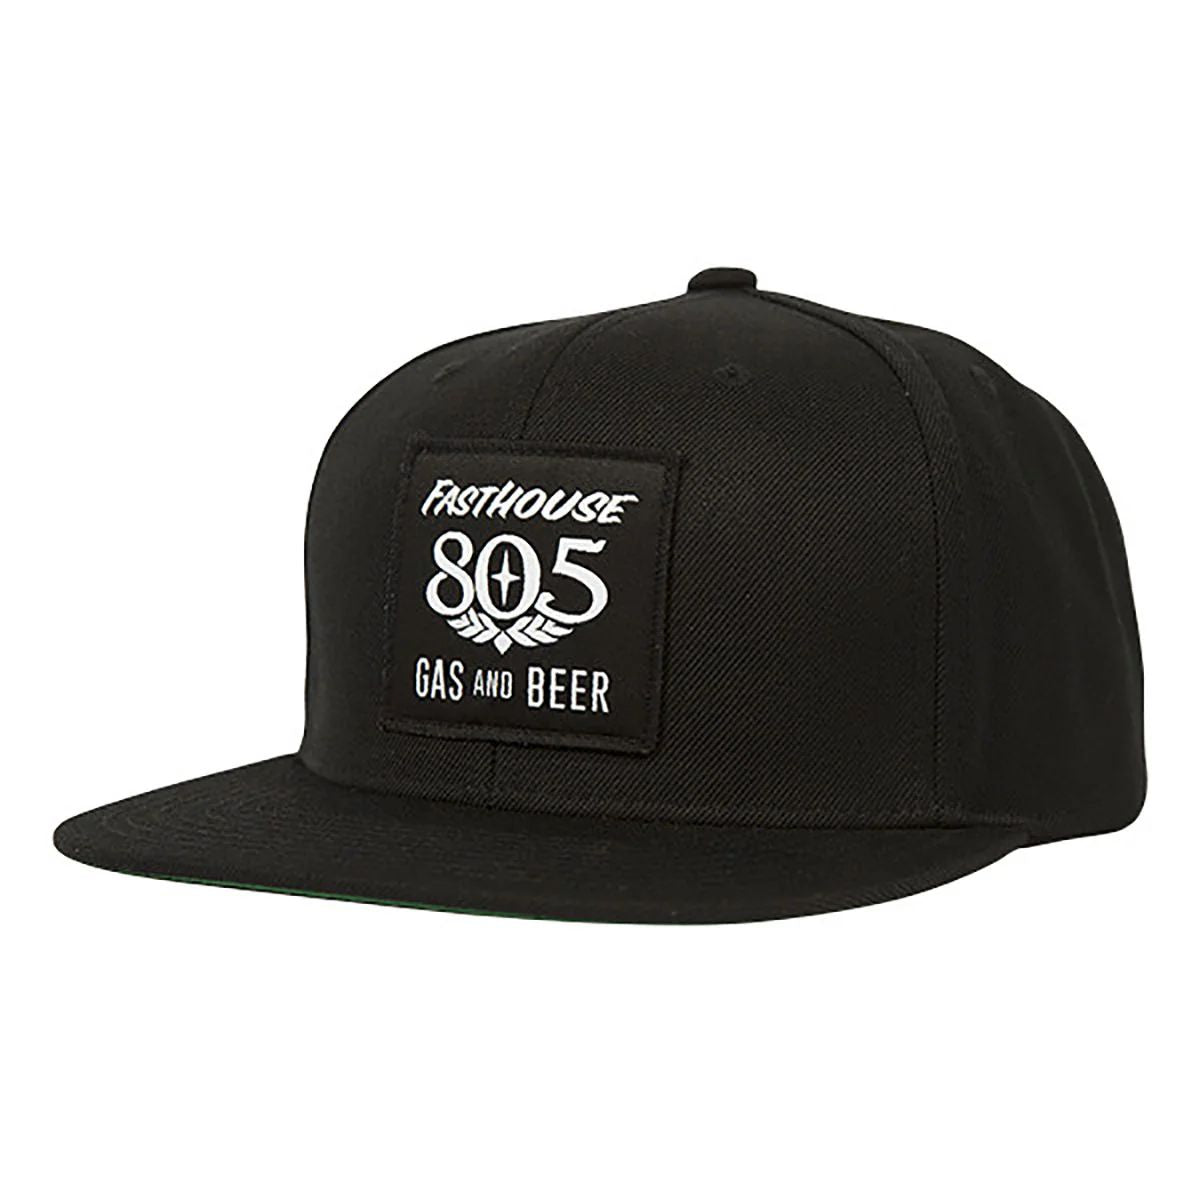 Fasthouse 805 Original Hat Black OS - Fasthouse Hats